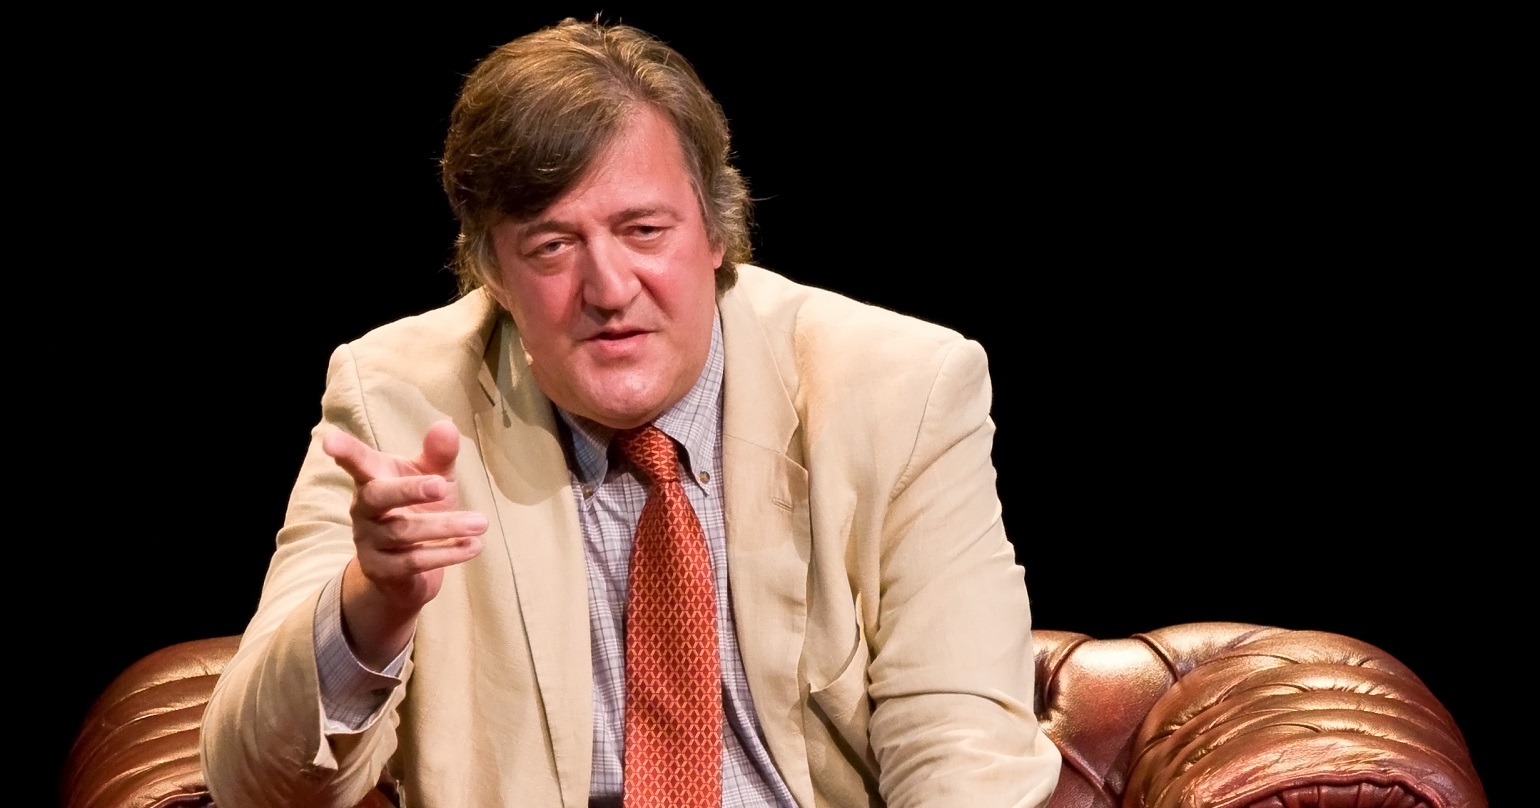 Stephen Fry in an armchair pointing